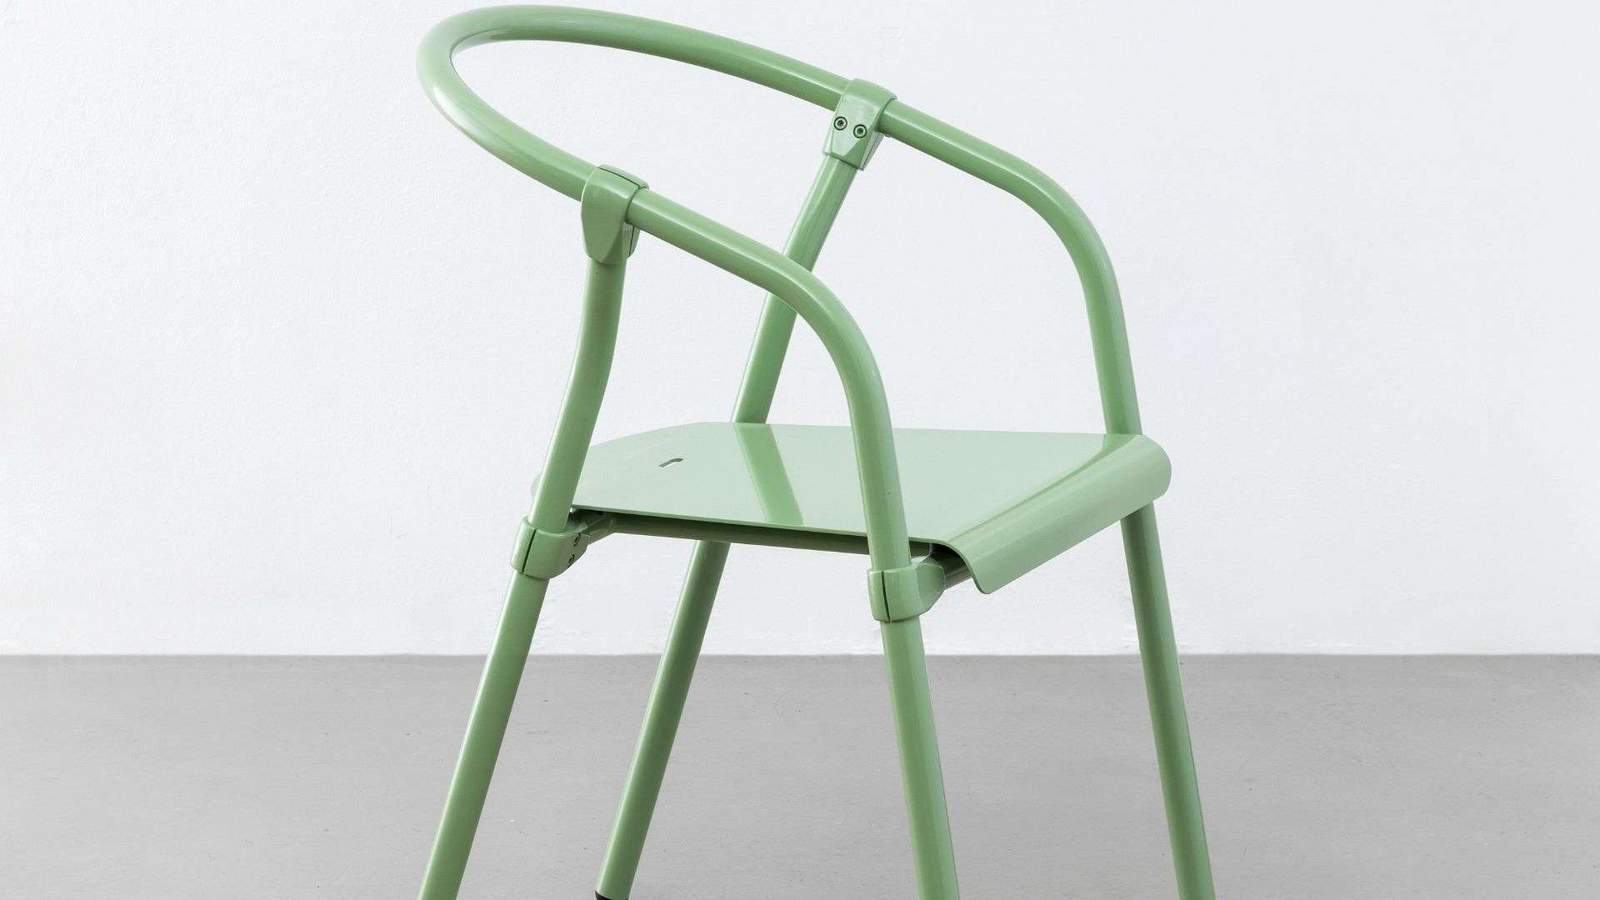 Tube Chair has a simple yet clever tubular construction